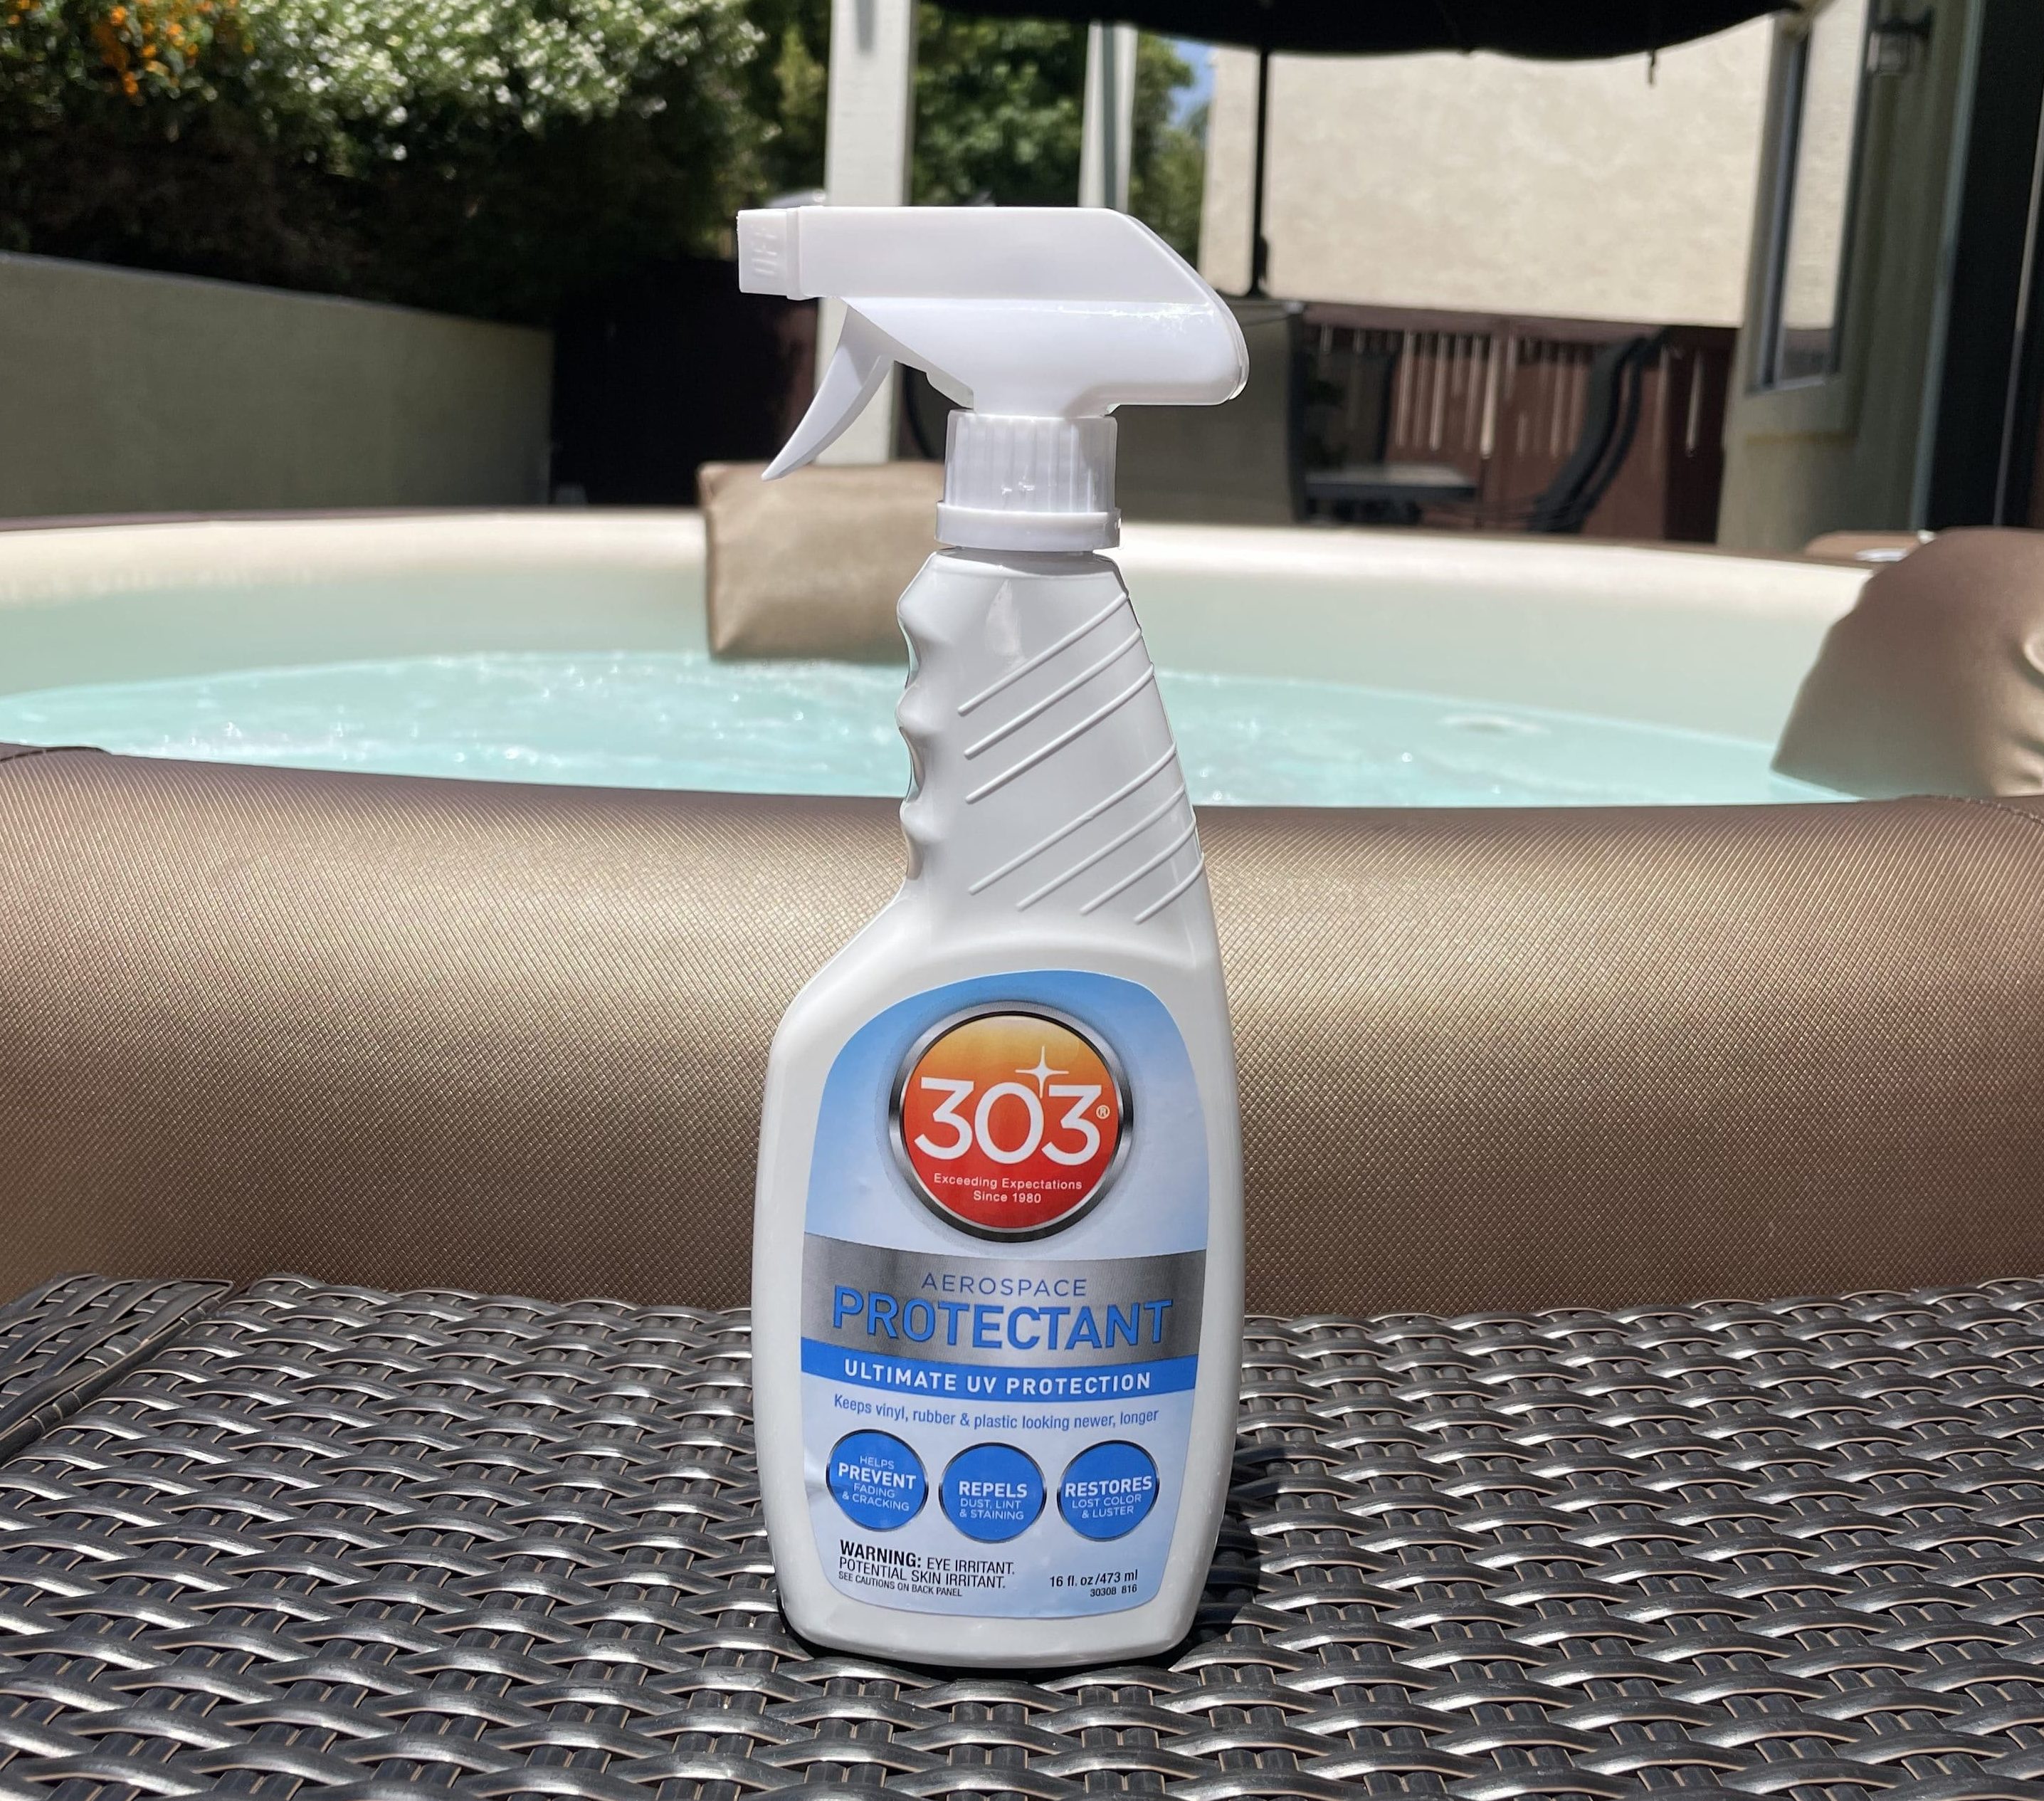 303 Aerospace Protectant - Simple Care by Softub Spas